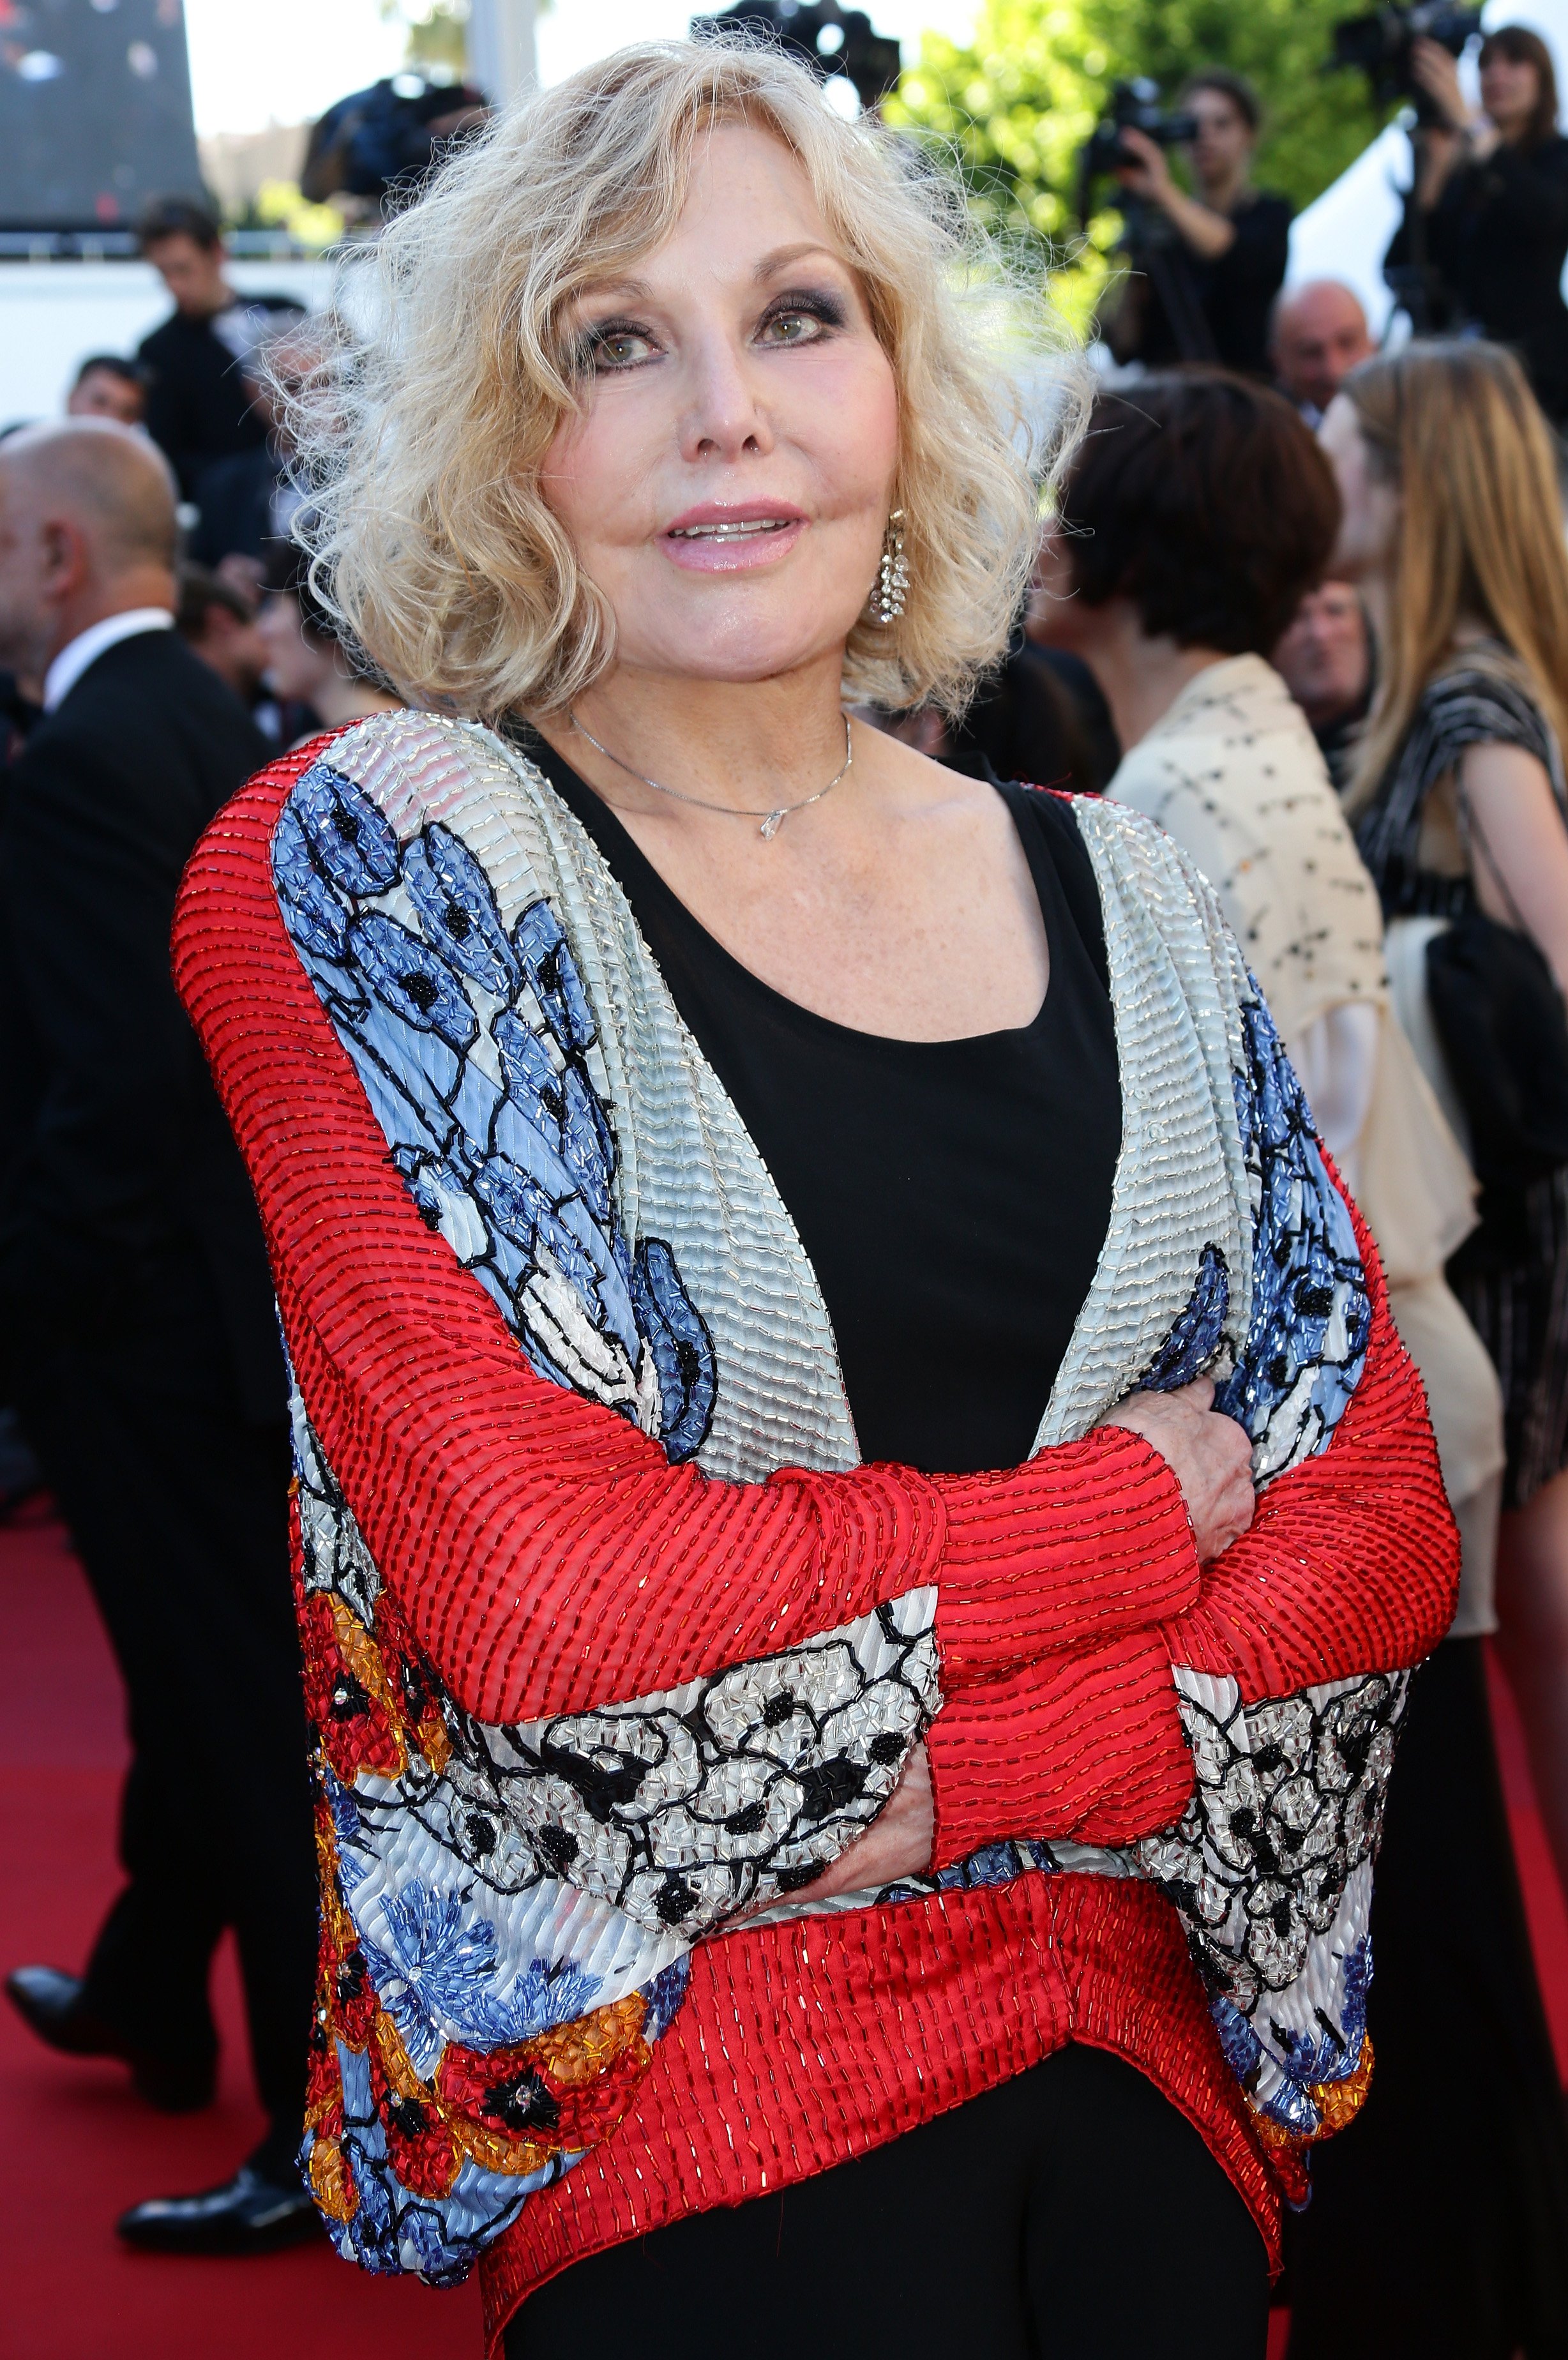  Actress Kim Novak attends the 'Zulu' Premiere and Closing Ceremony during the 66th Annual Cannes Film Festival at the Palais des Festivals on May 26, 2013 in Cannes, France.  | Source: Getty Images